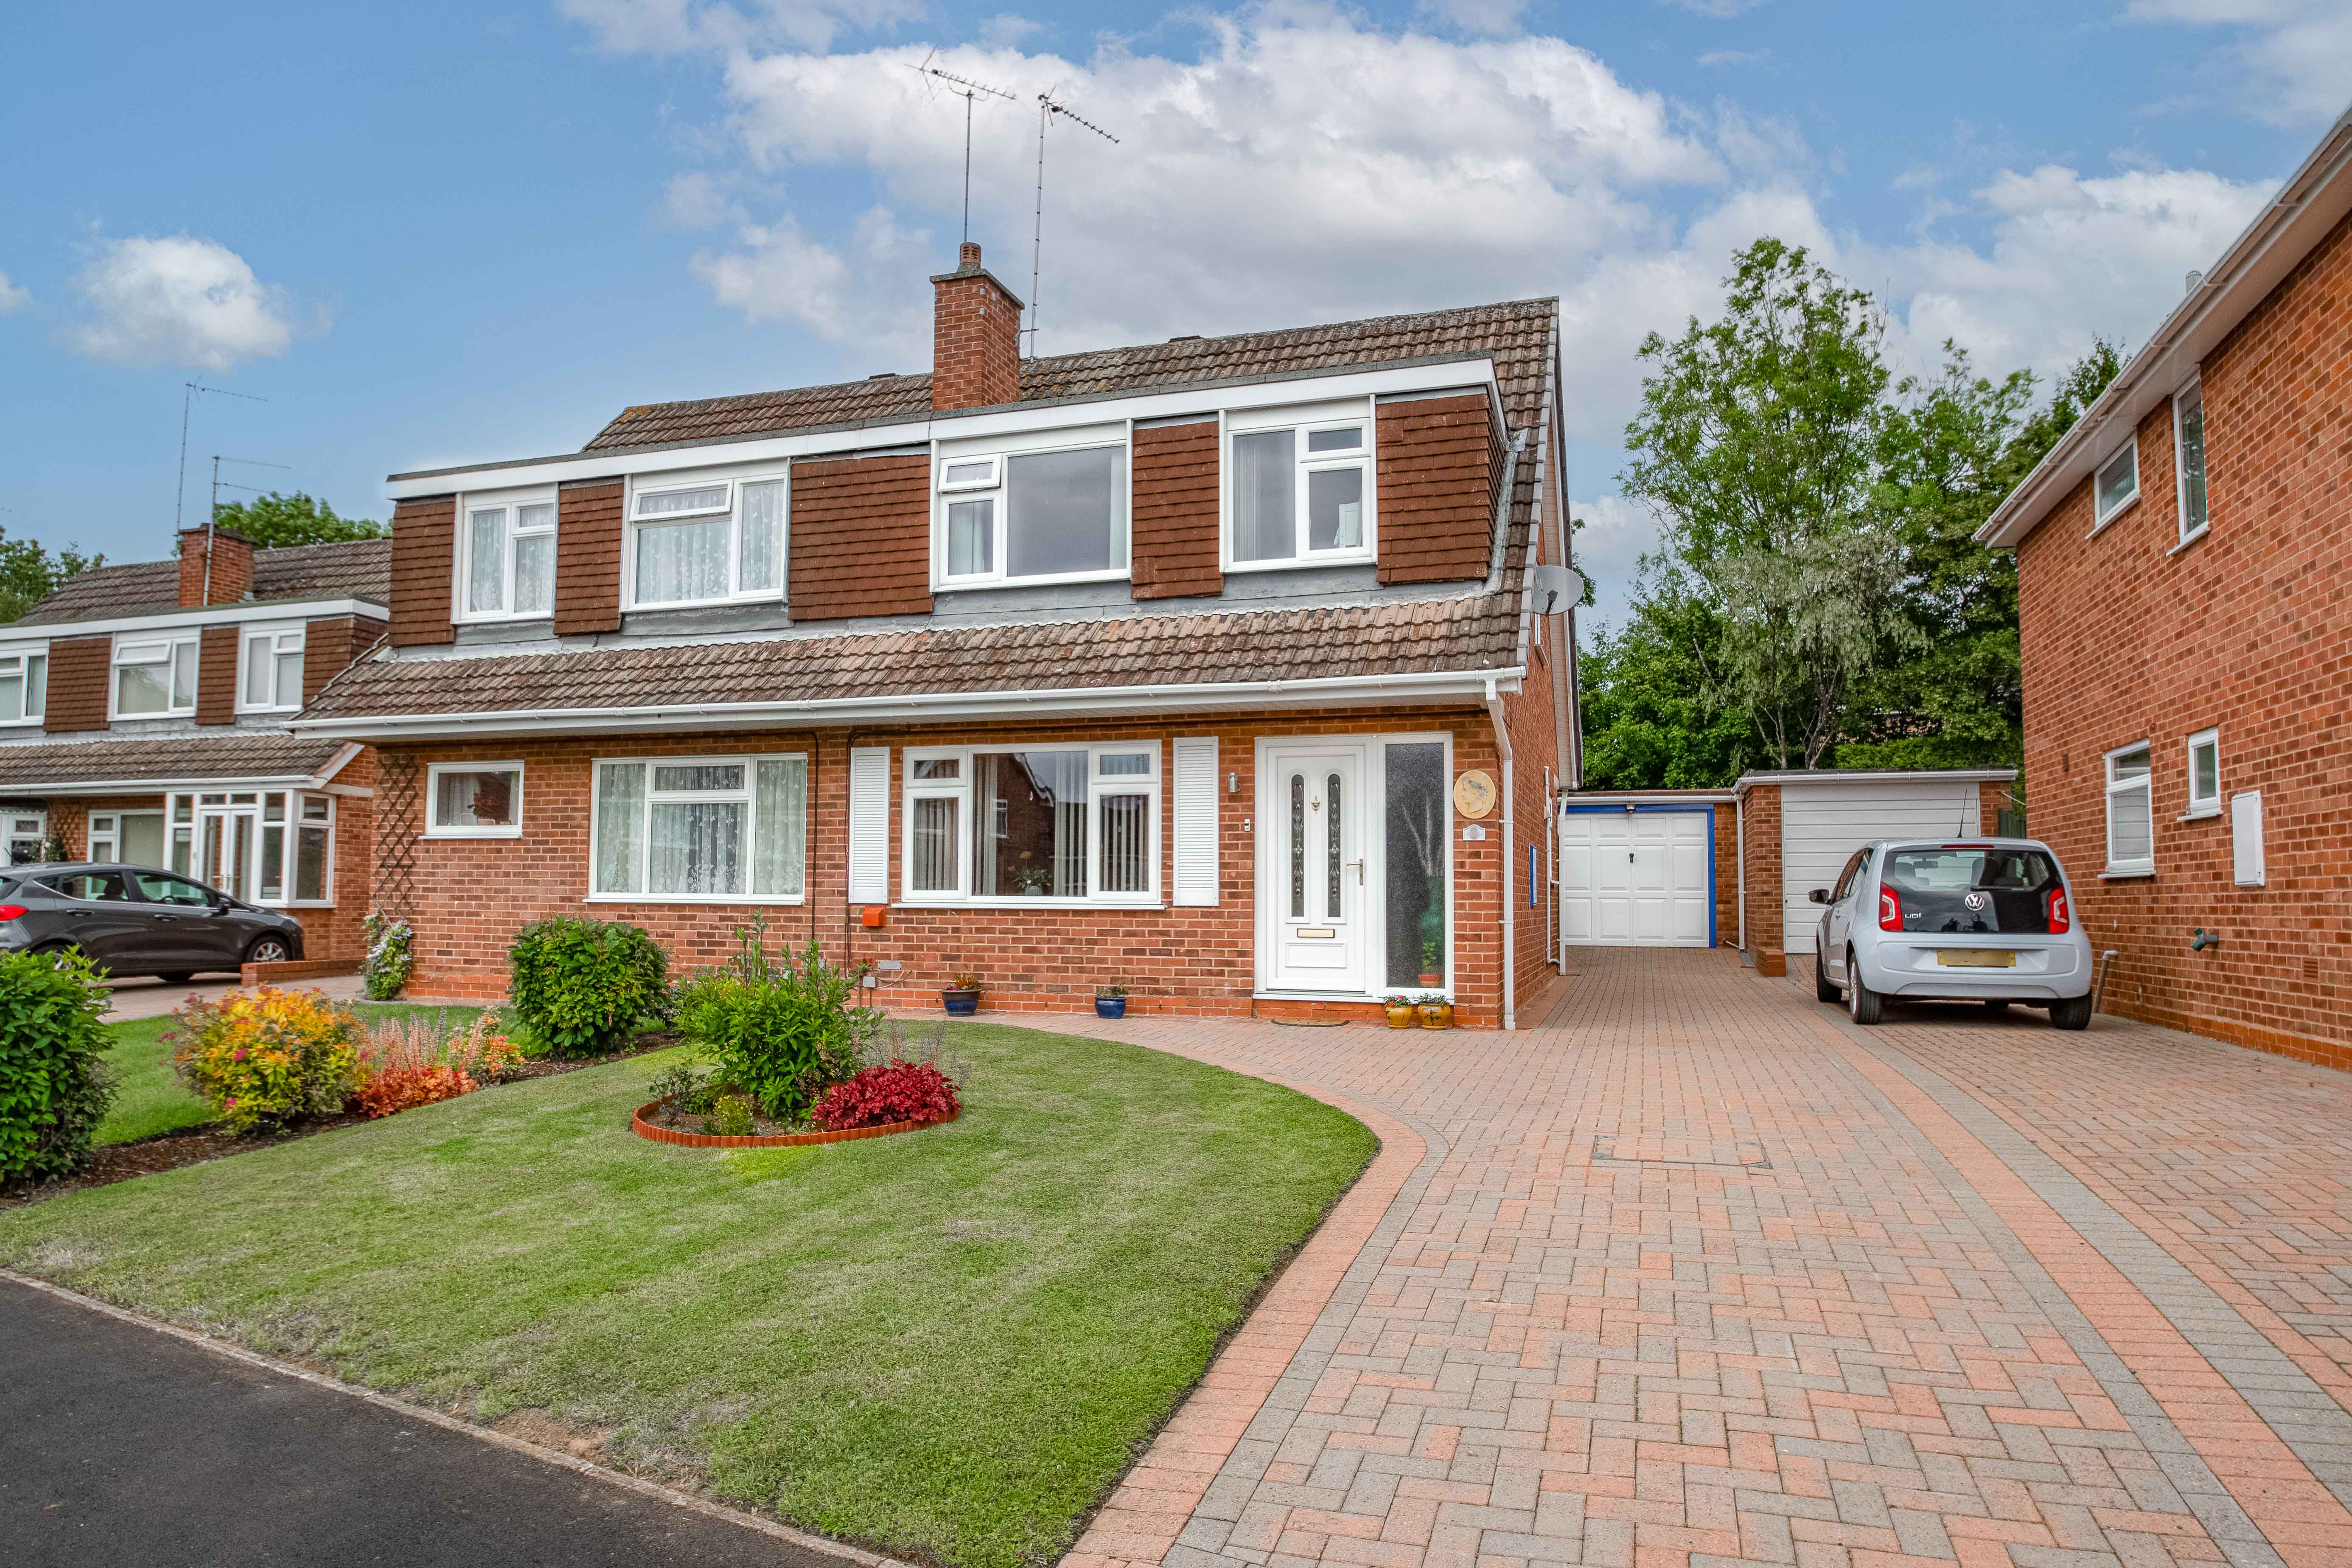 3 bed house for sale in Bodenham Close, Redditch  - Property Image 1